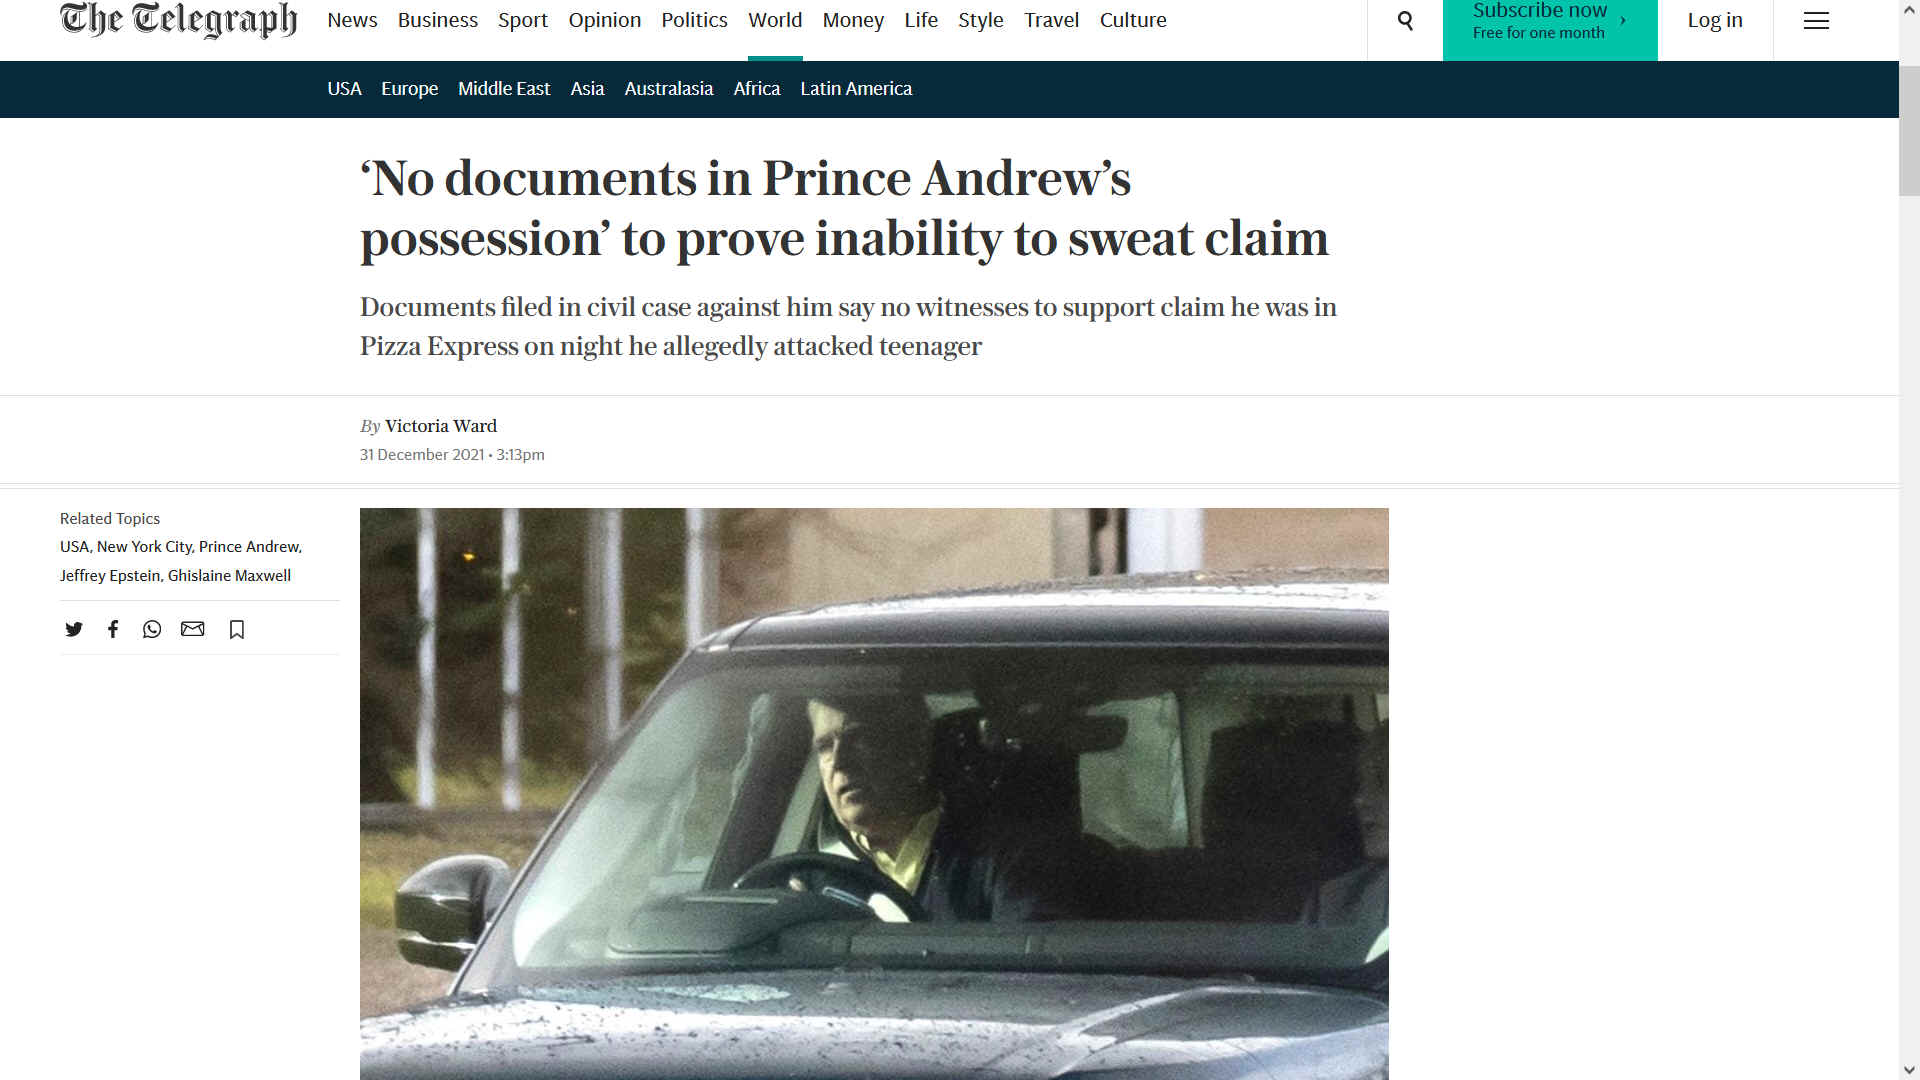 Prince Andrew documents sweat claim & Pizza Express - no proofs